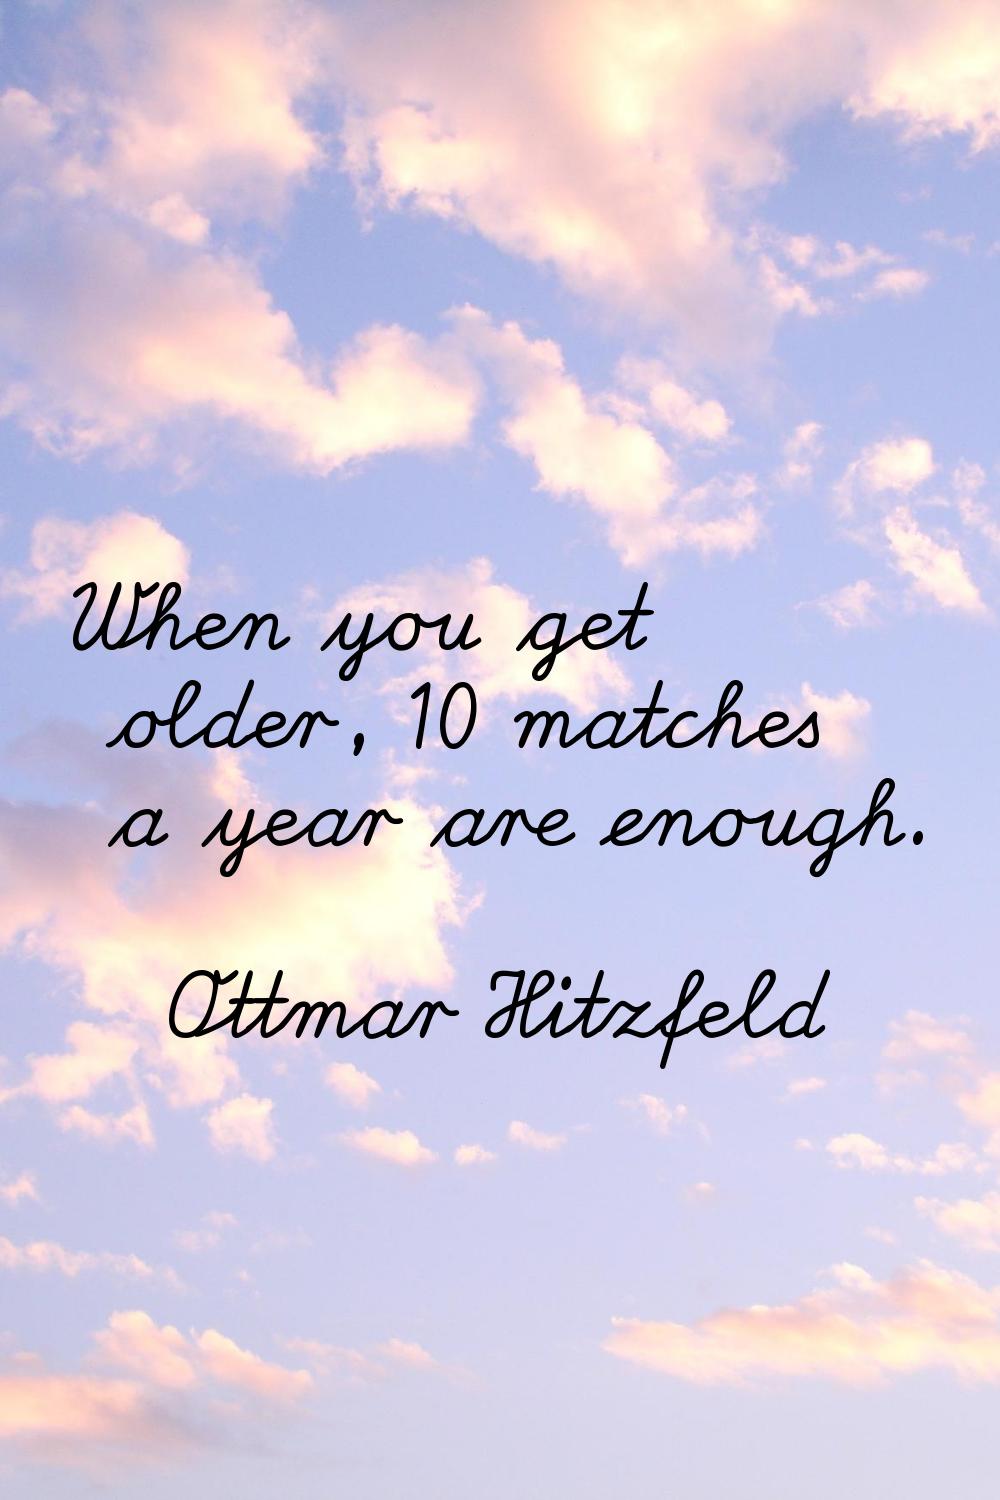 When you get older, 10 matches a year are enough.